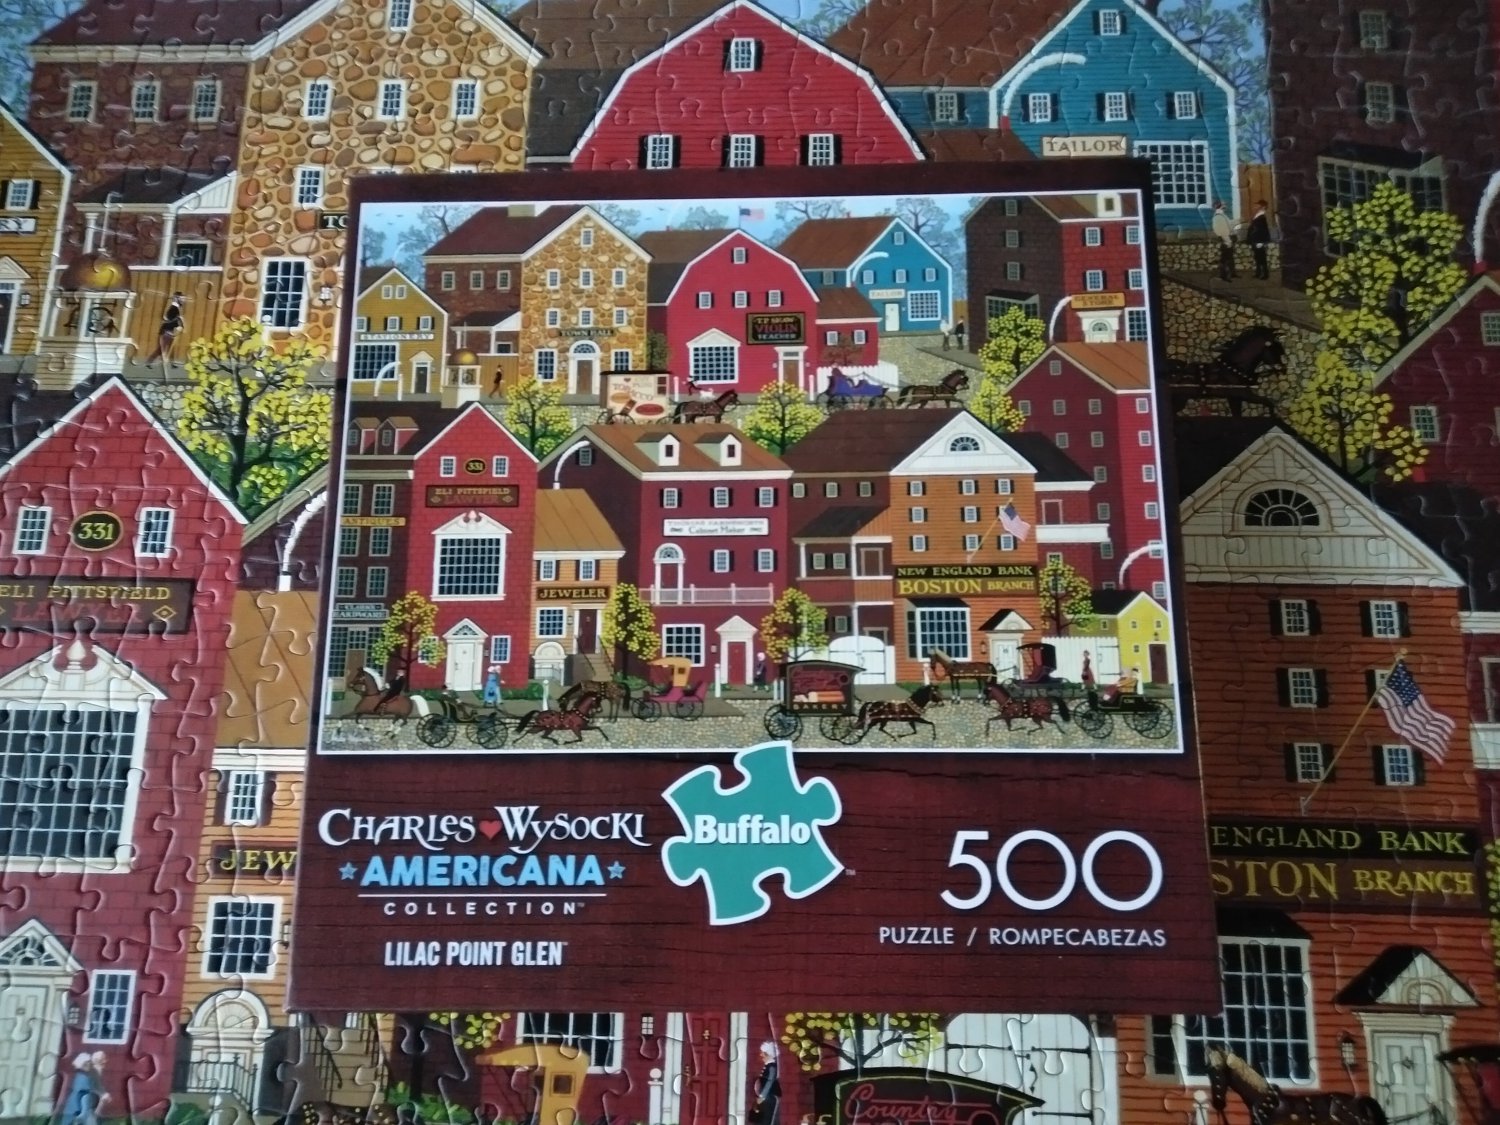 Lilac Point Glen Charles Wysocki Buffalo Games Puzzle 500pc for sale online 